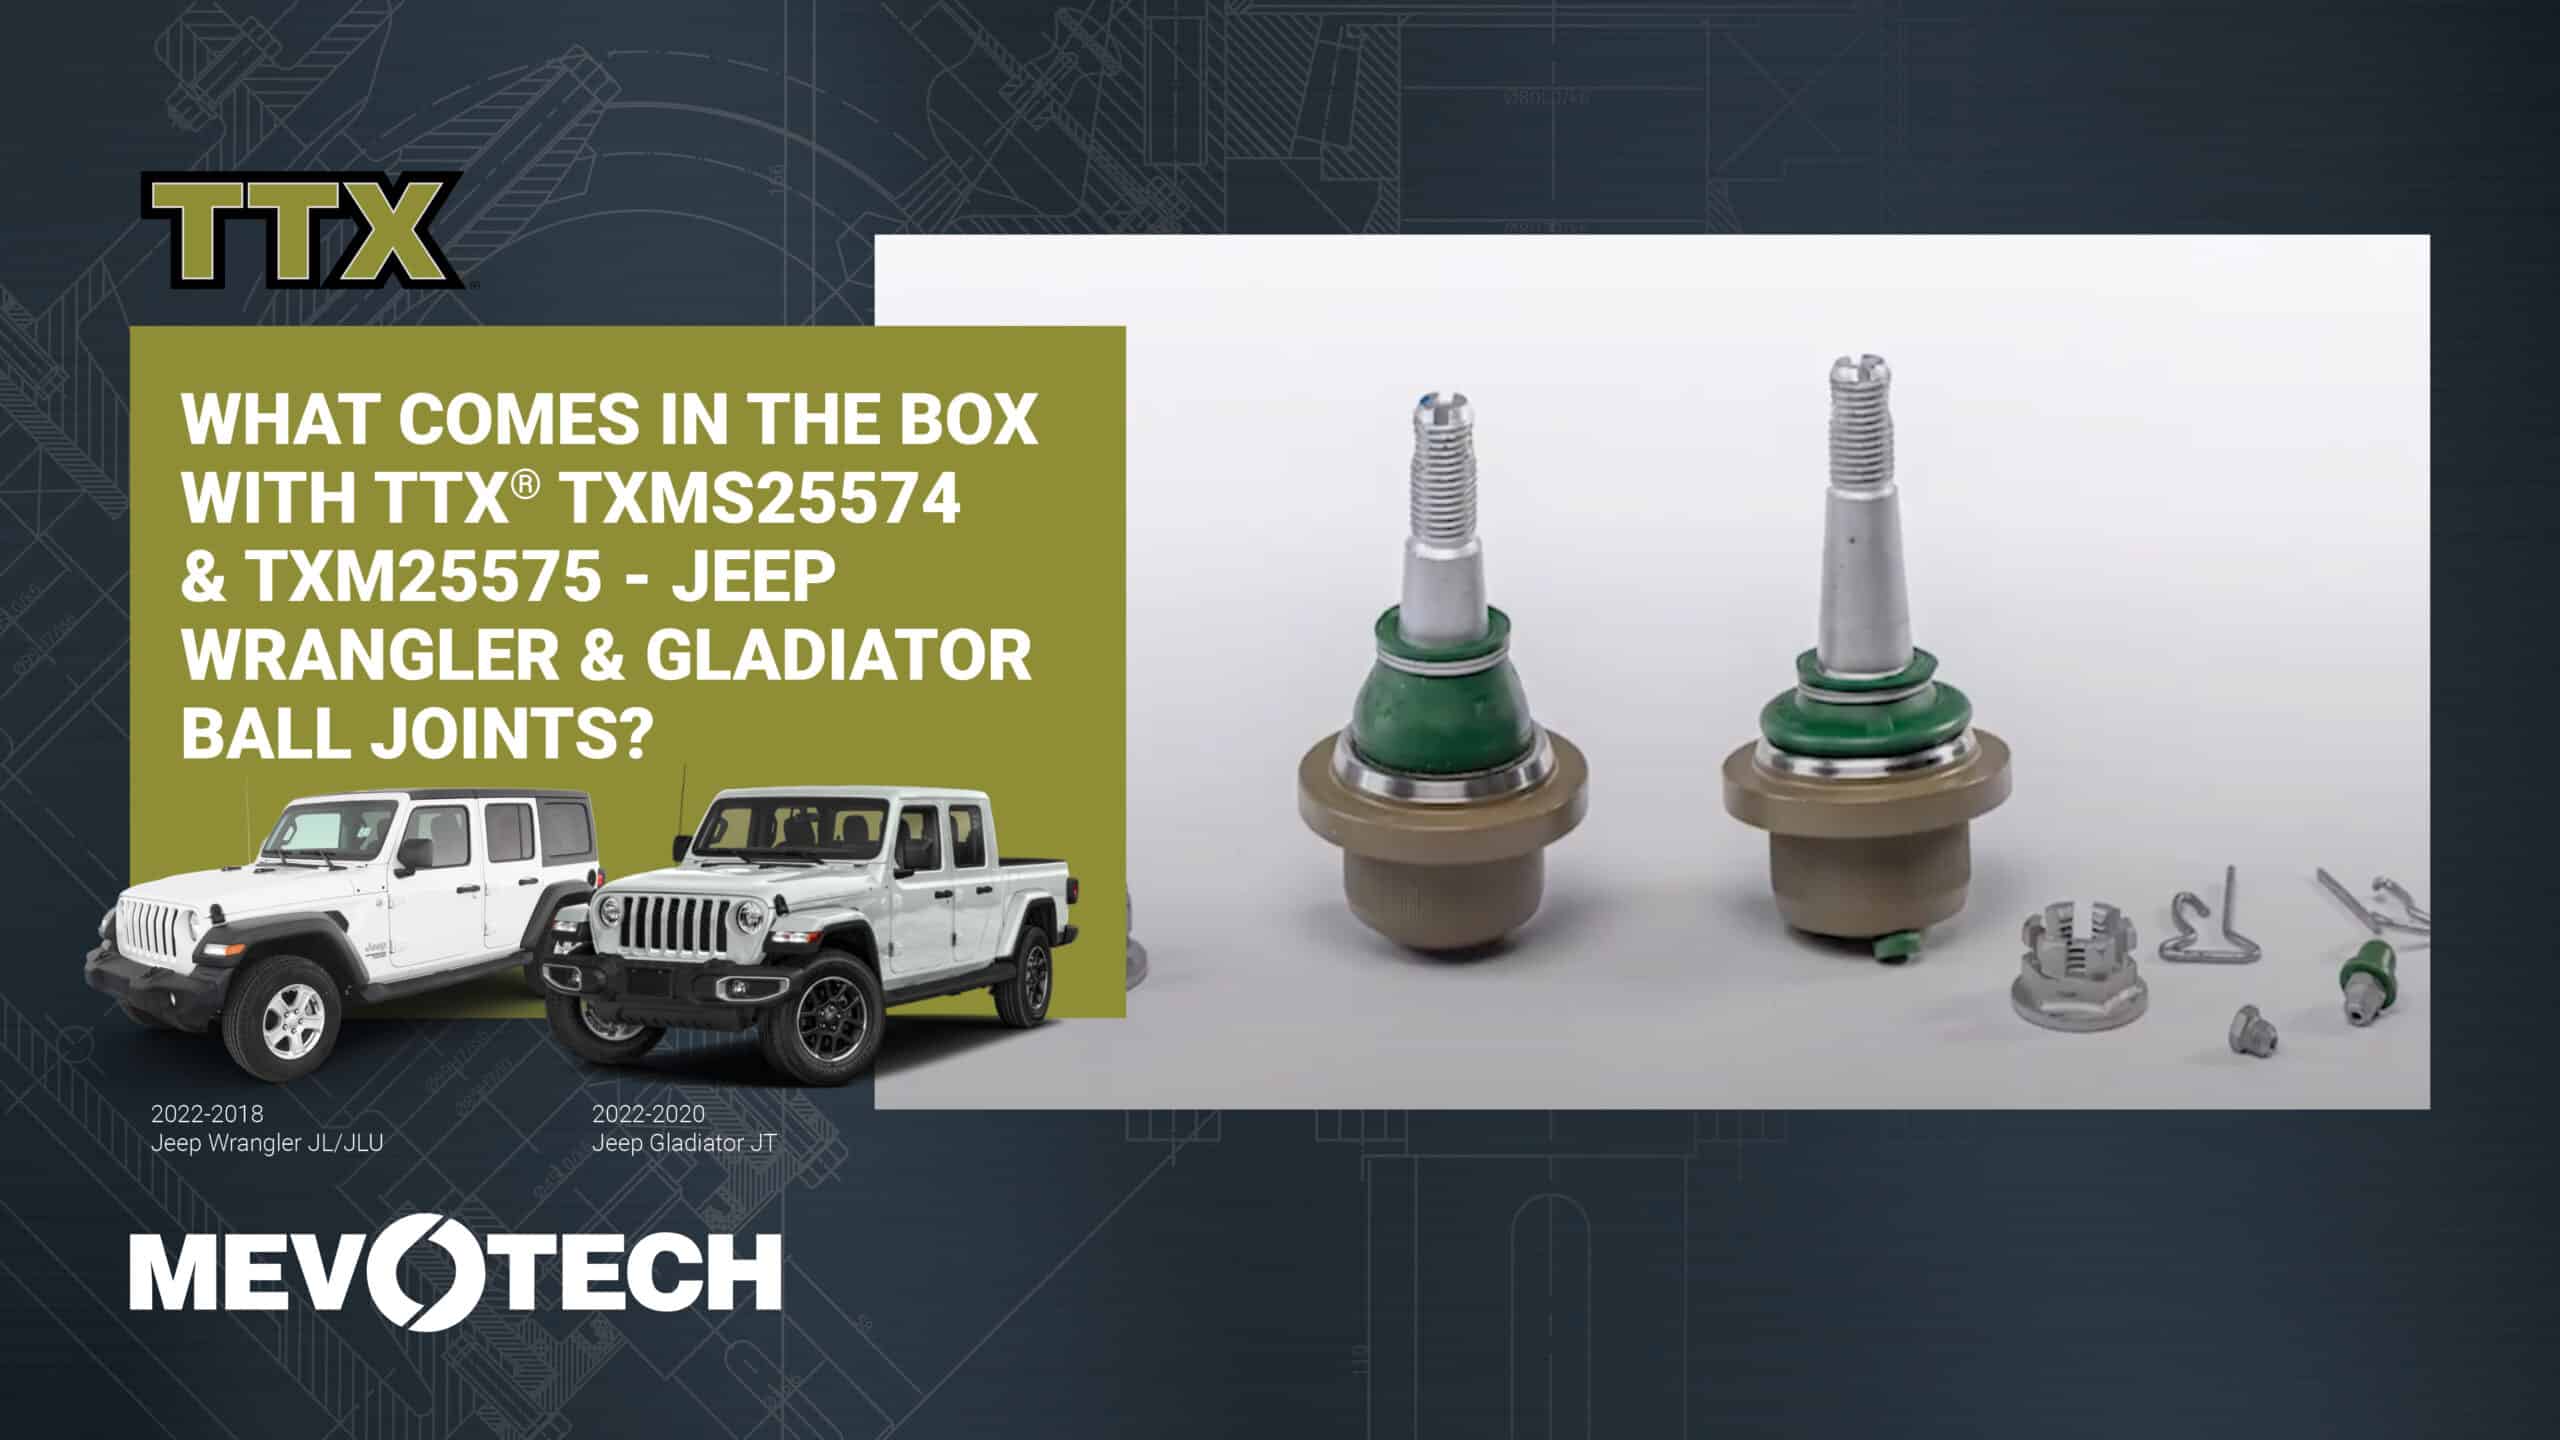 WHAT COMES IN THE BOX WITH TTX® TXMS25574 & TXM25575 – JEEP WRANGLER & GLADIATOR BALL JOINTS?